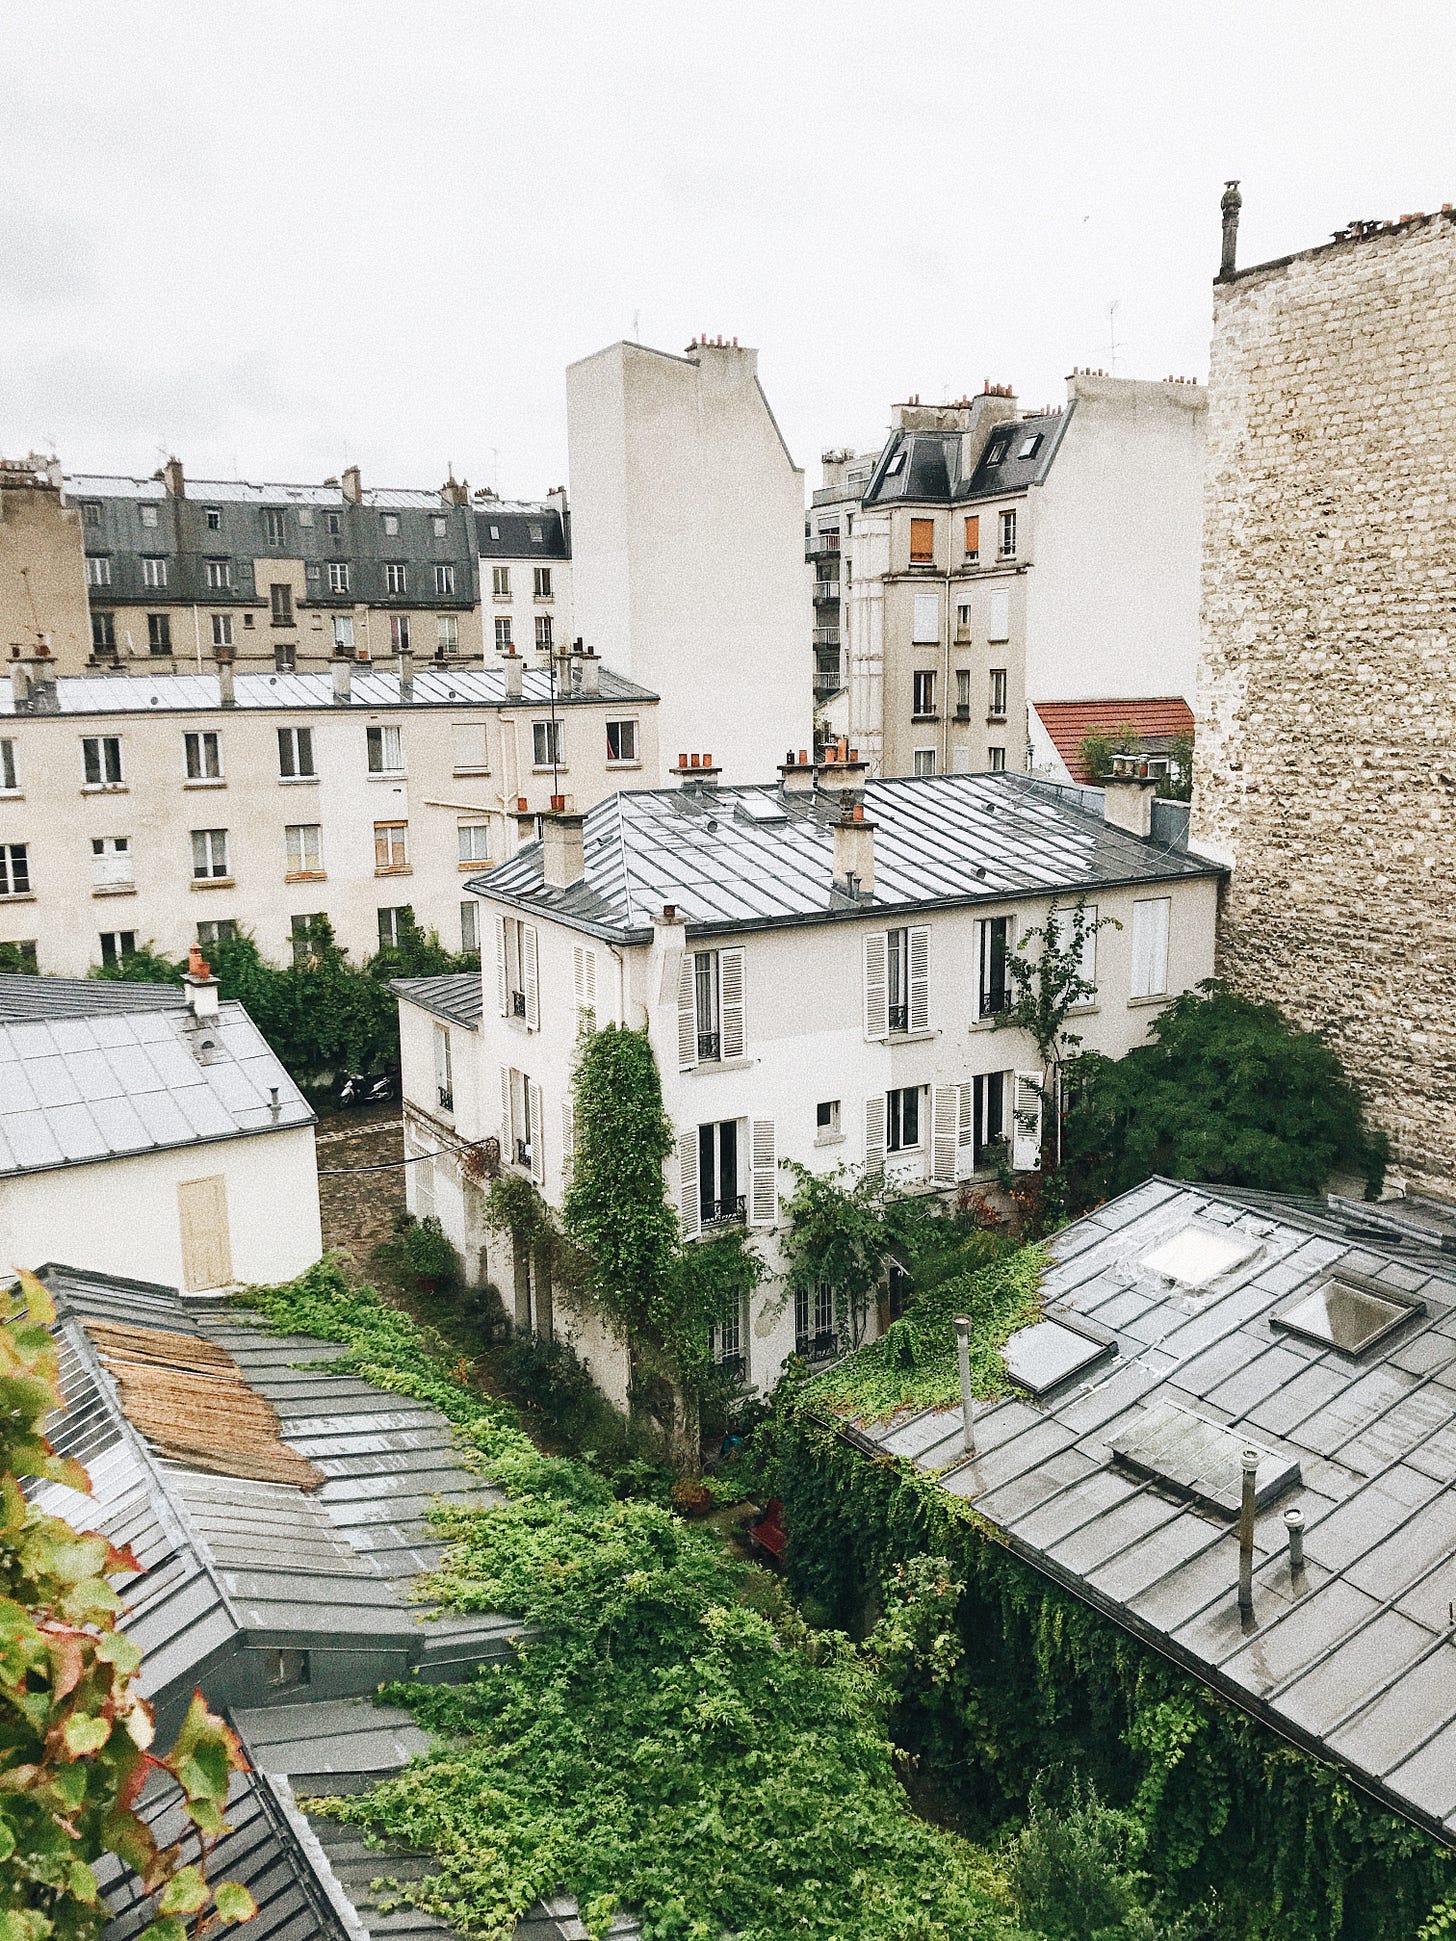 A balcony view from an apartment in Paris overlooking other white brick and concrete buildings with white shutters on most of the windows. The sky is cloudy, and the dark metal rooftops are glistening from rain.